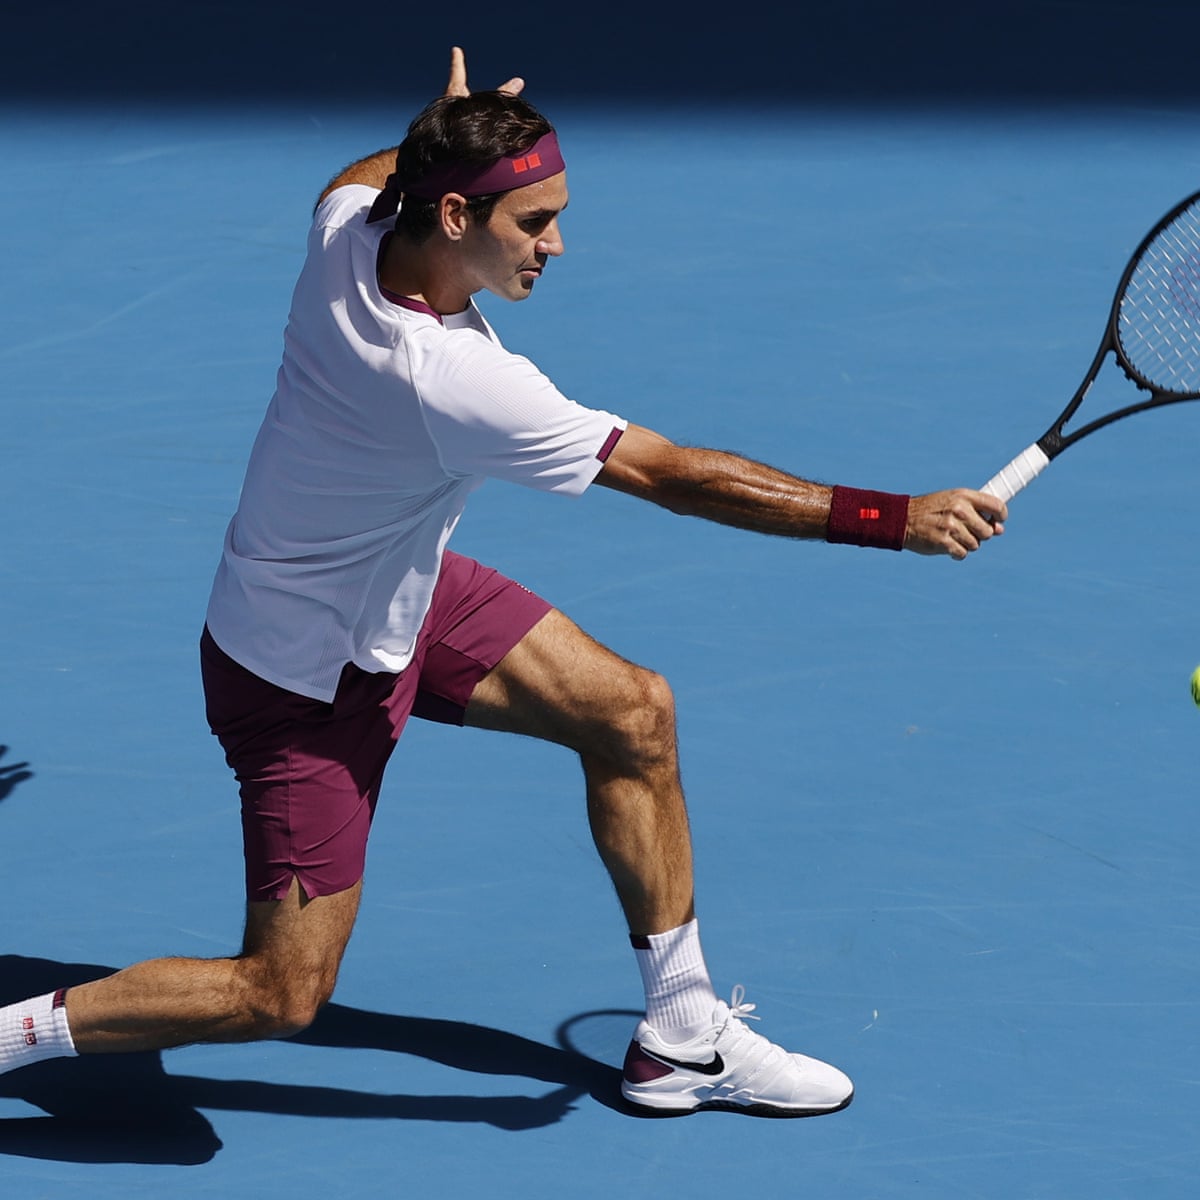 Roger Federer was graceful in play and gracious in defeat | Roger Federer |  The Guardian